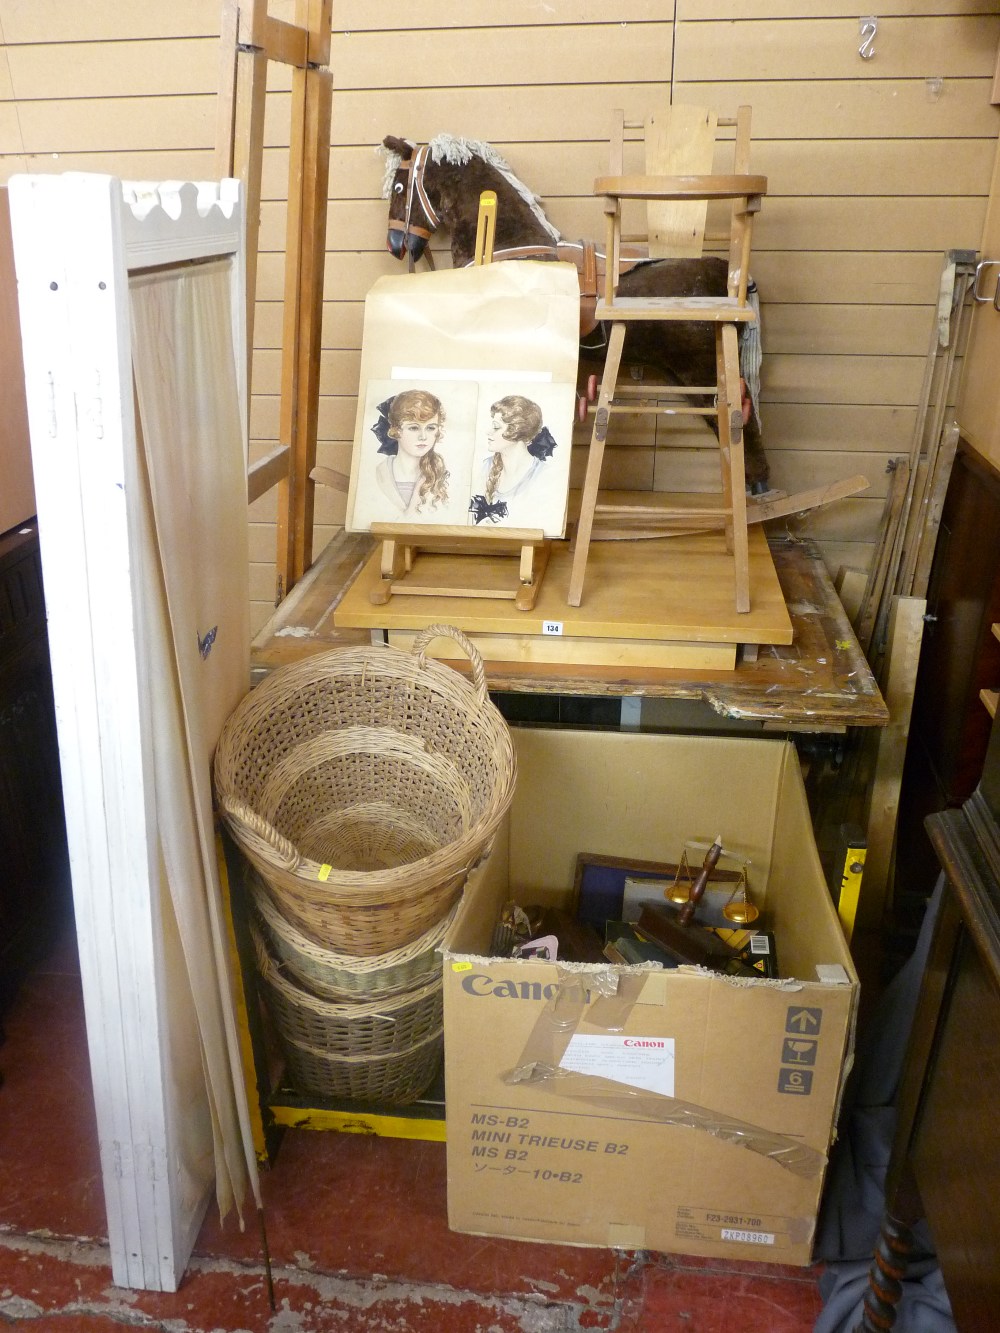 Mixed parcel of vintage and later artist's easels, a work table and one other, a four fold